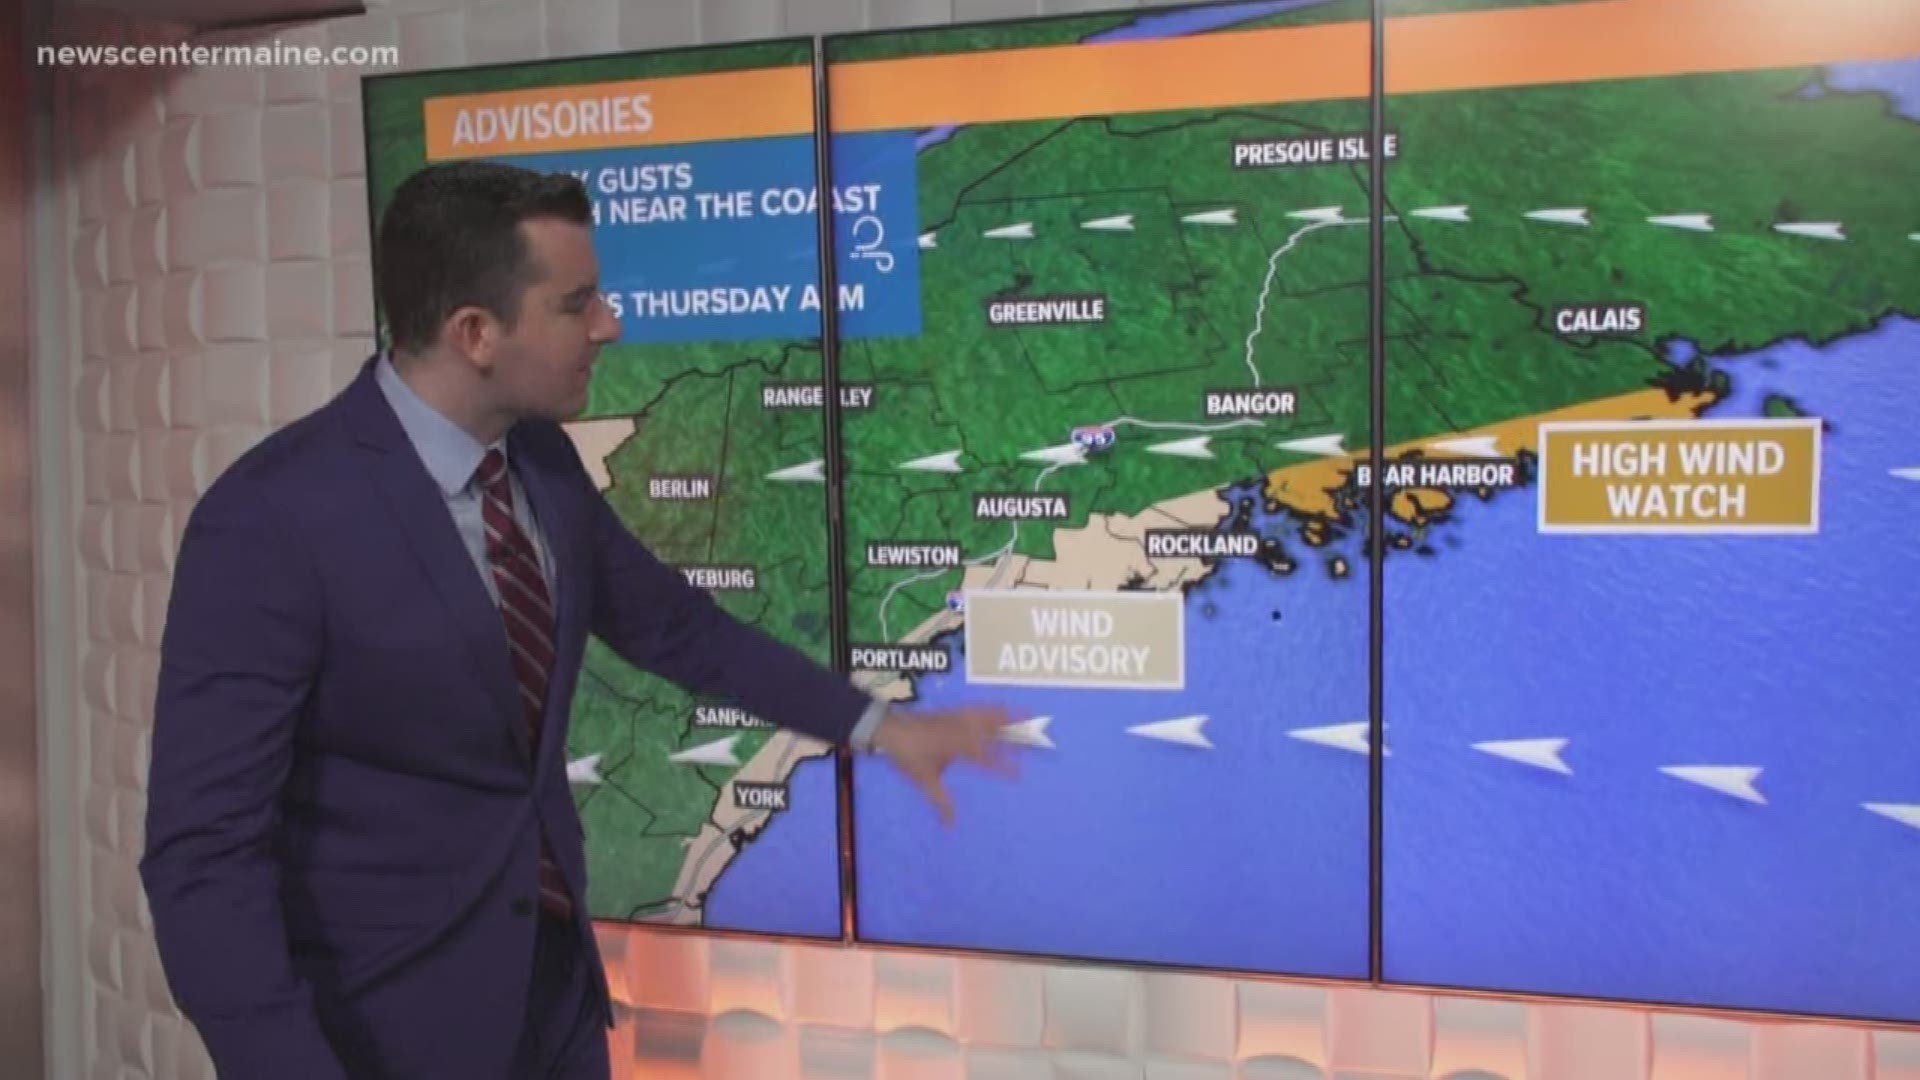 Meteorologist Ryan Breton has some concerns about power outages during the coming storm.